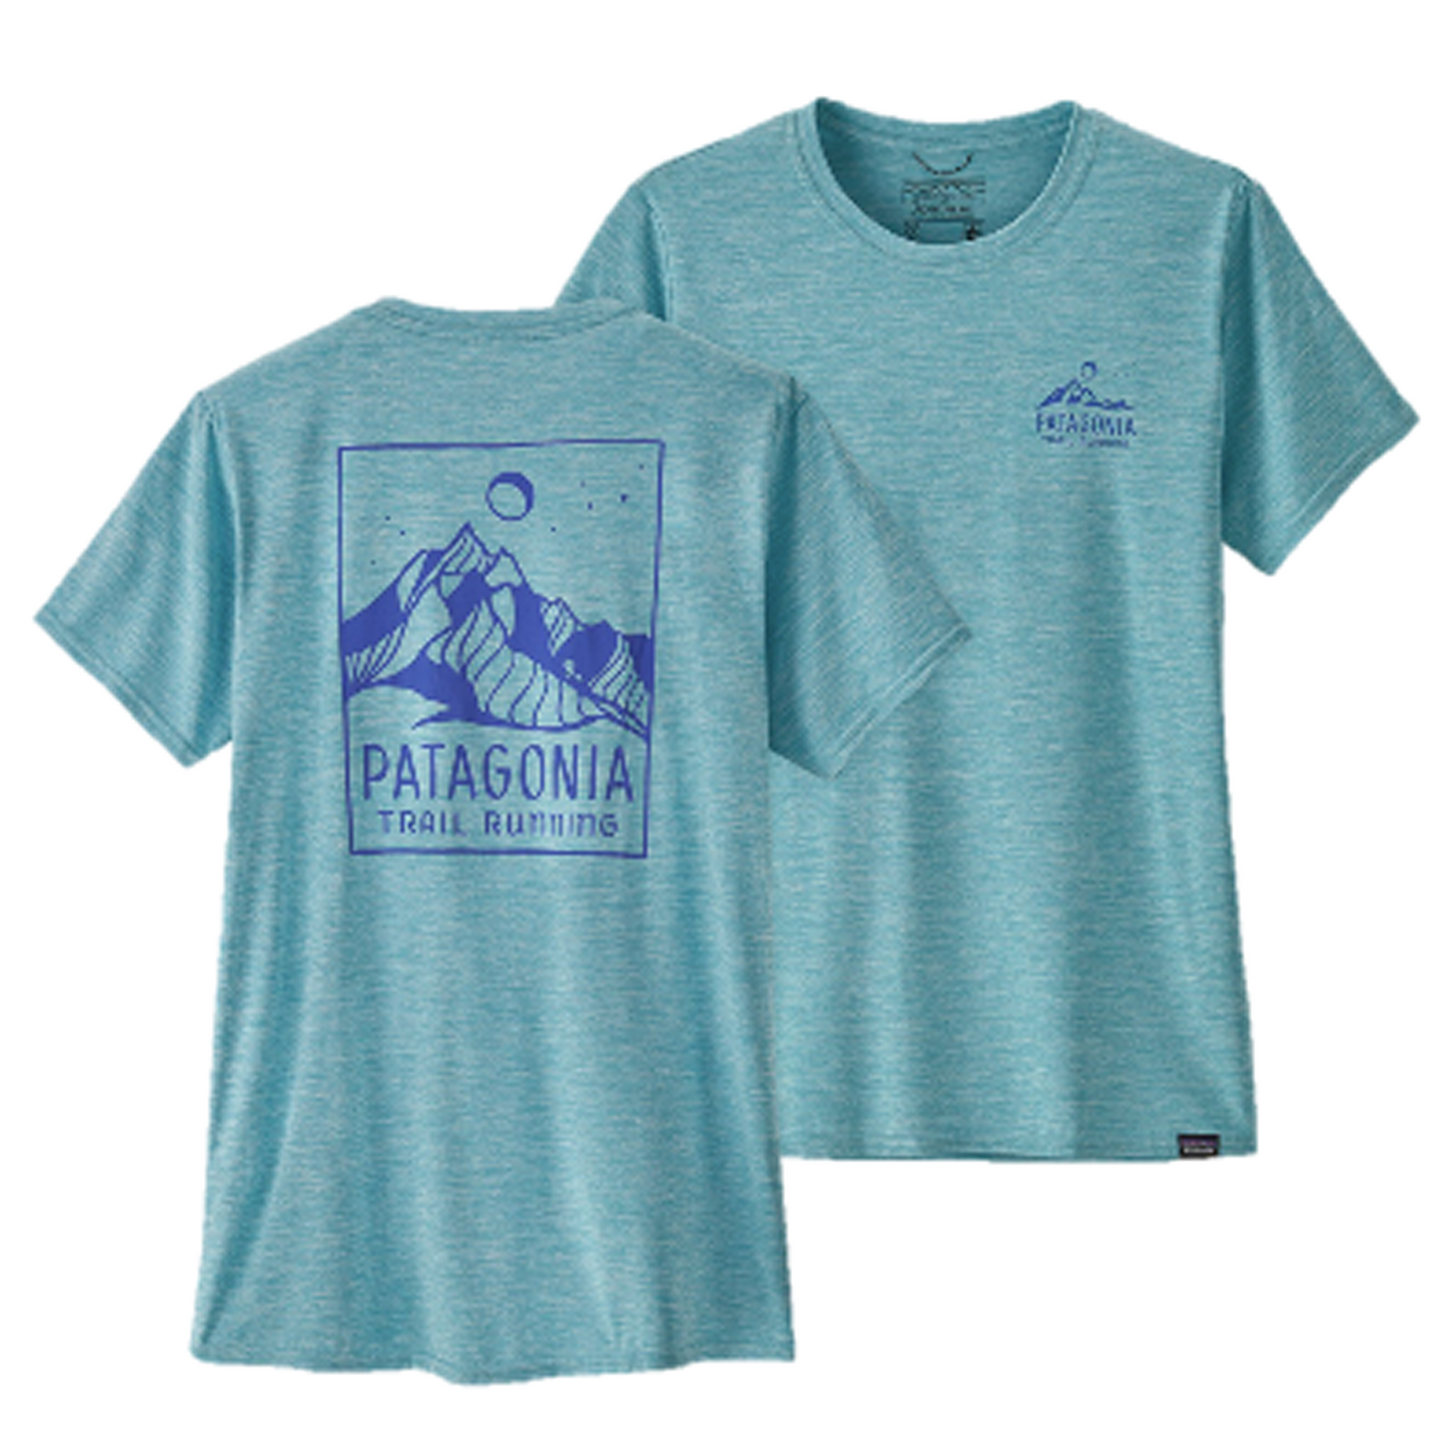 Women's cap cool daily graphic t-shirt in colour sky blue with graphic of a mountain scene on the back.